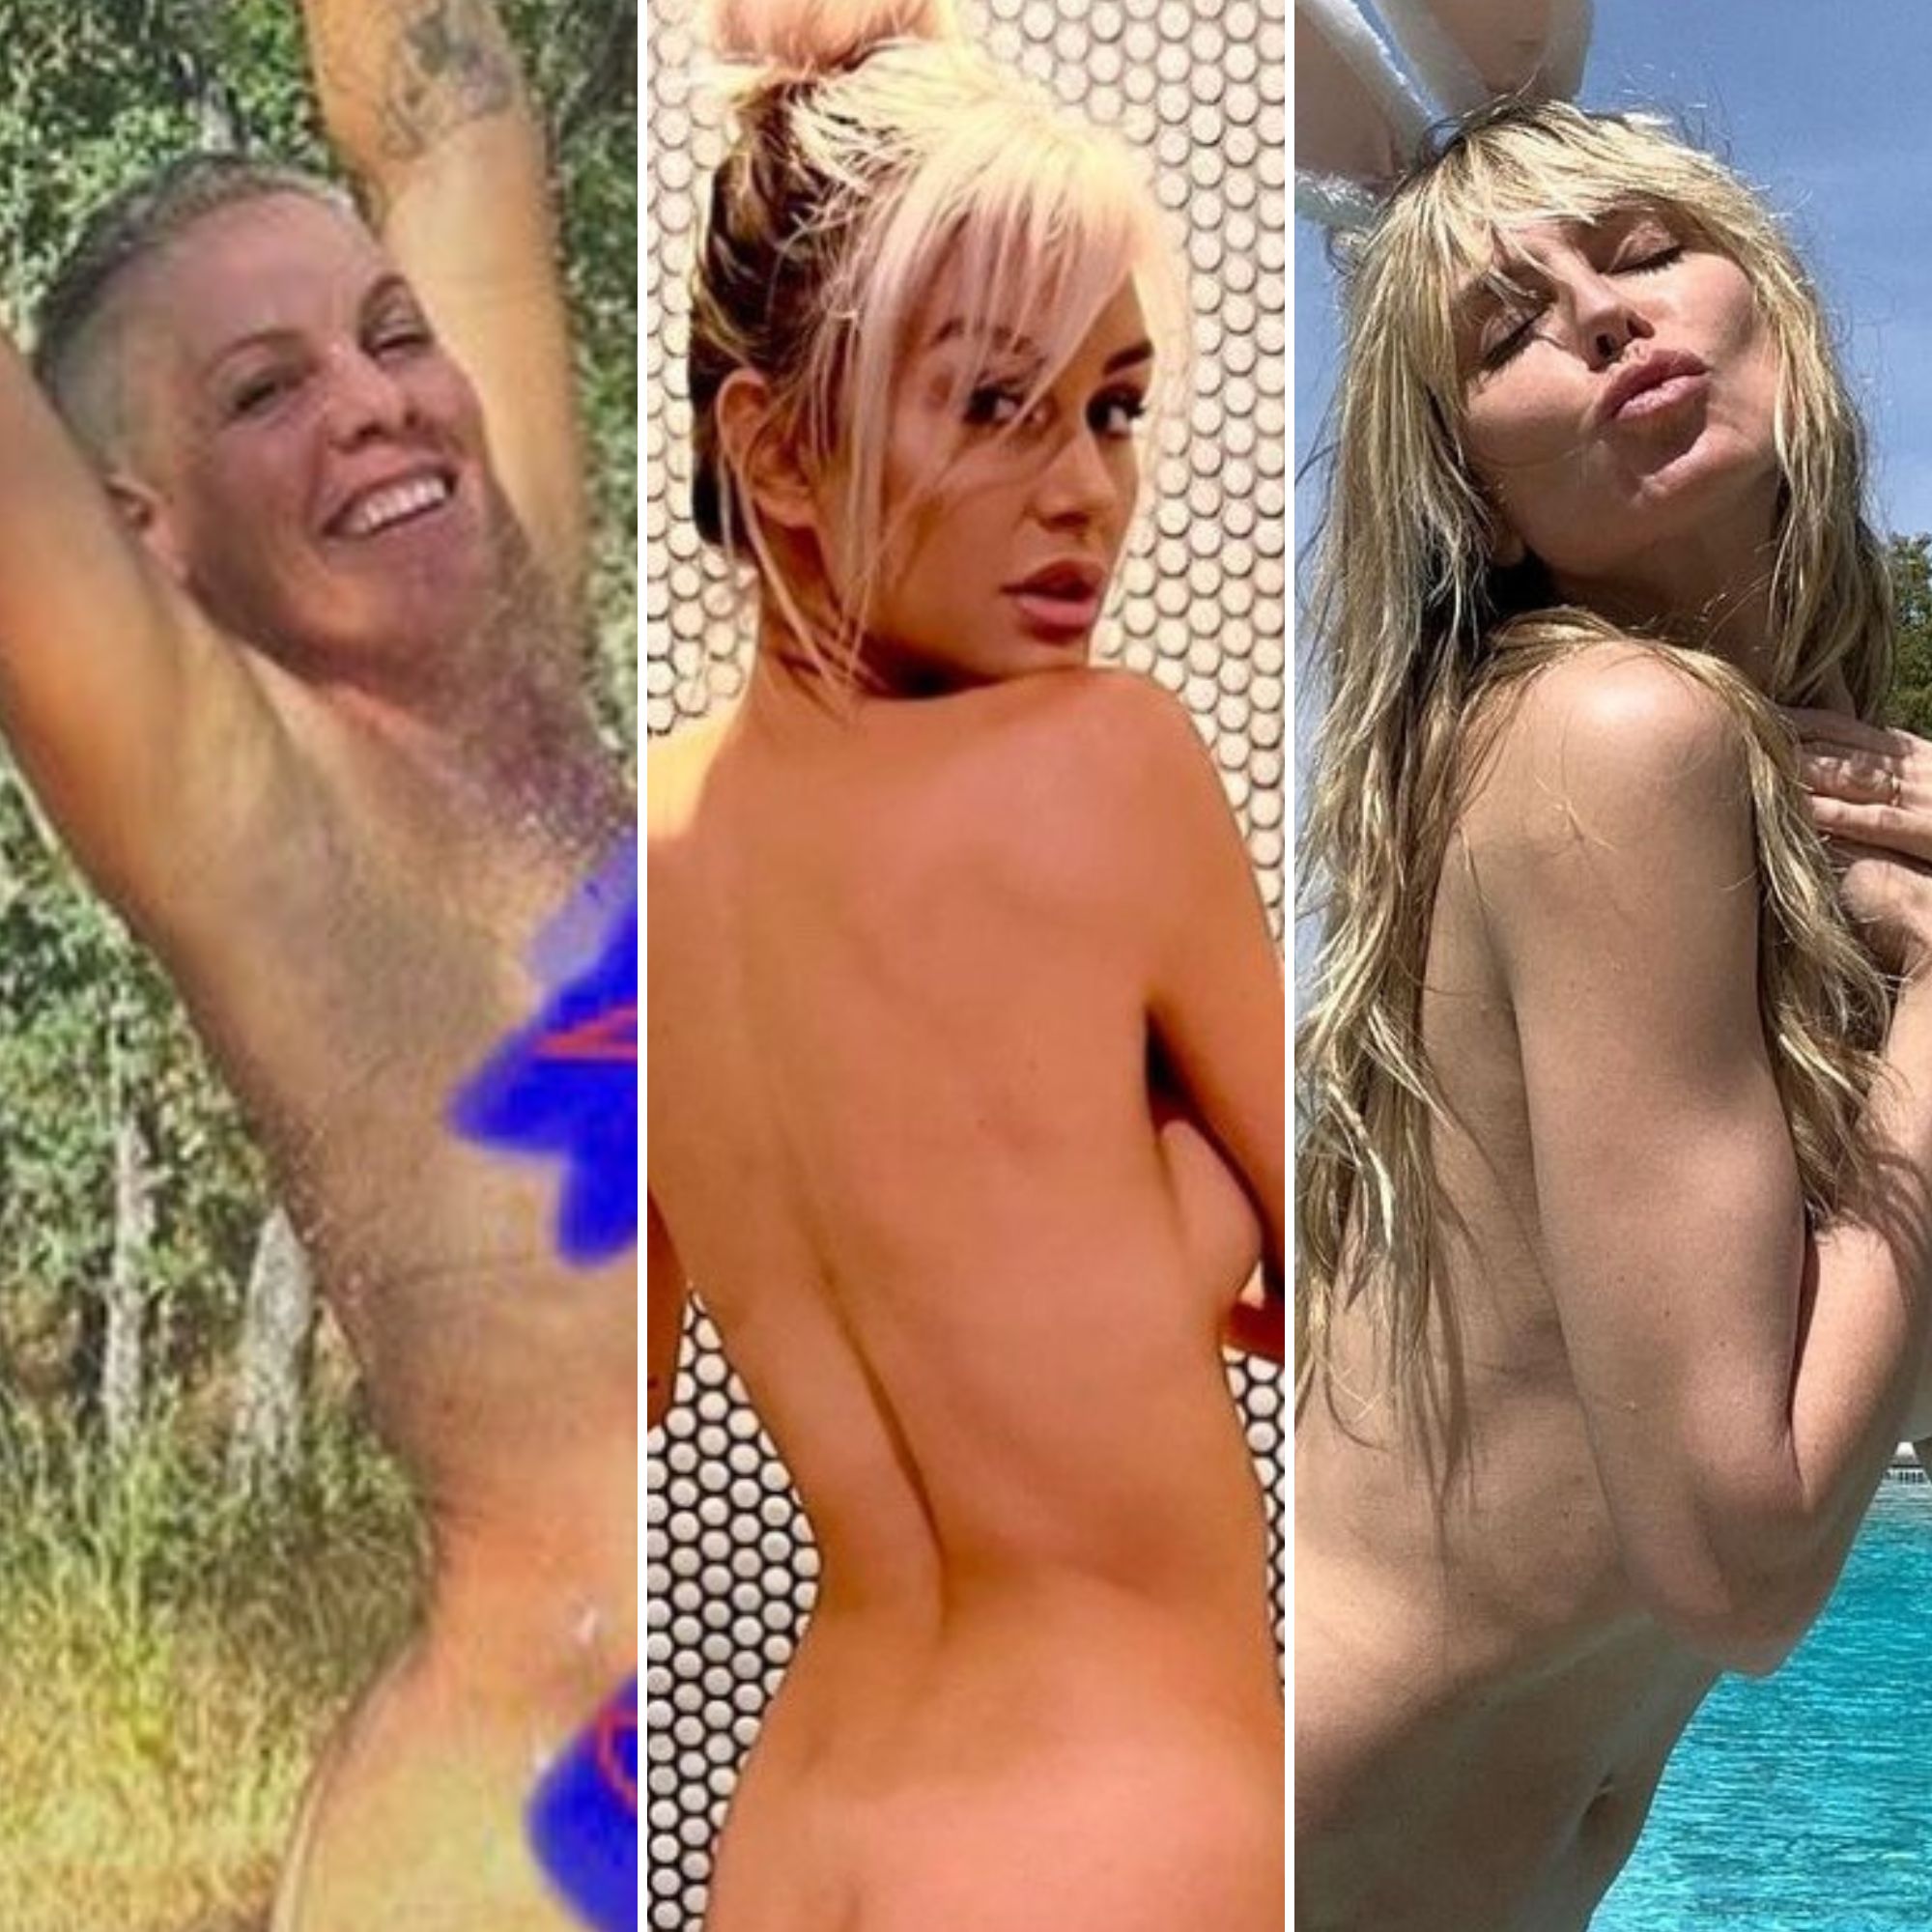 Uncensored Nude Celebs - Celebrities Who Post Nude Photos: See Naked Pictures of Stars